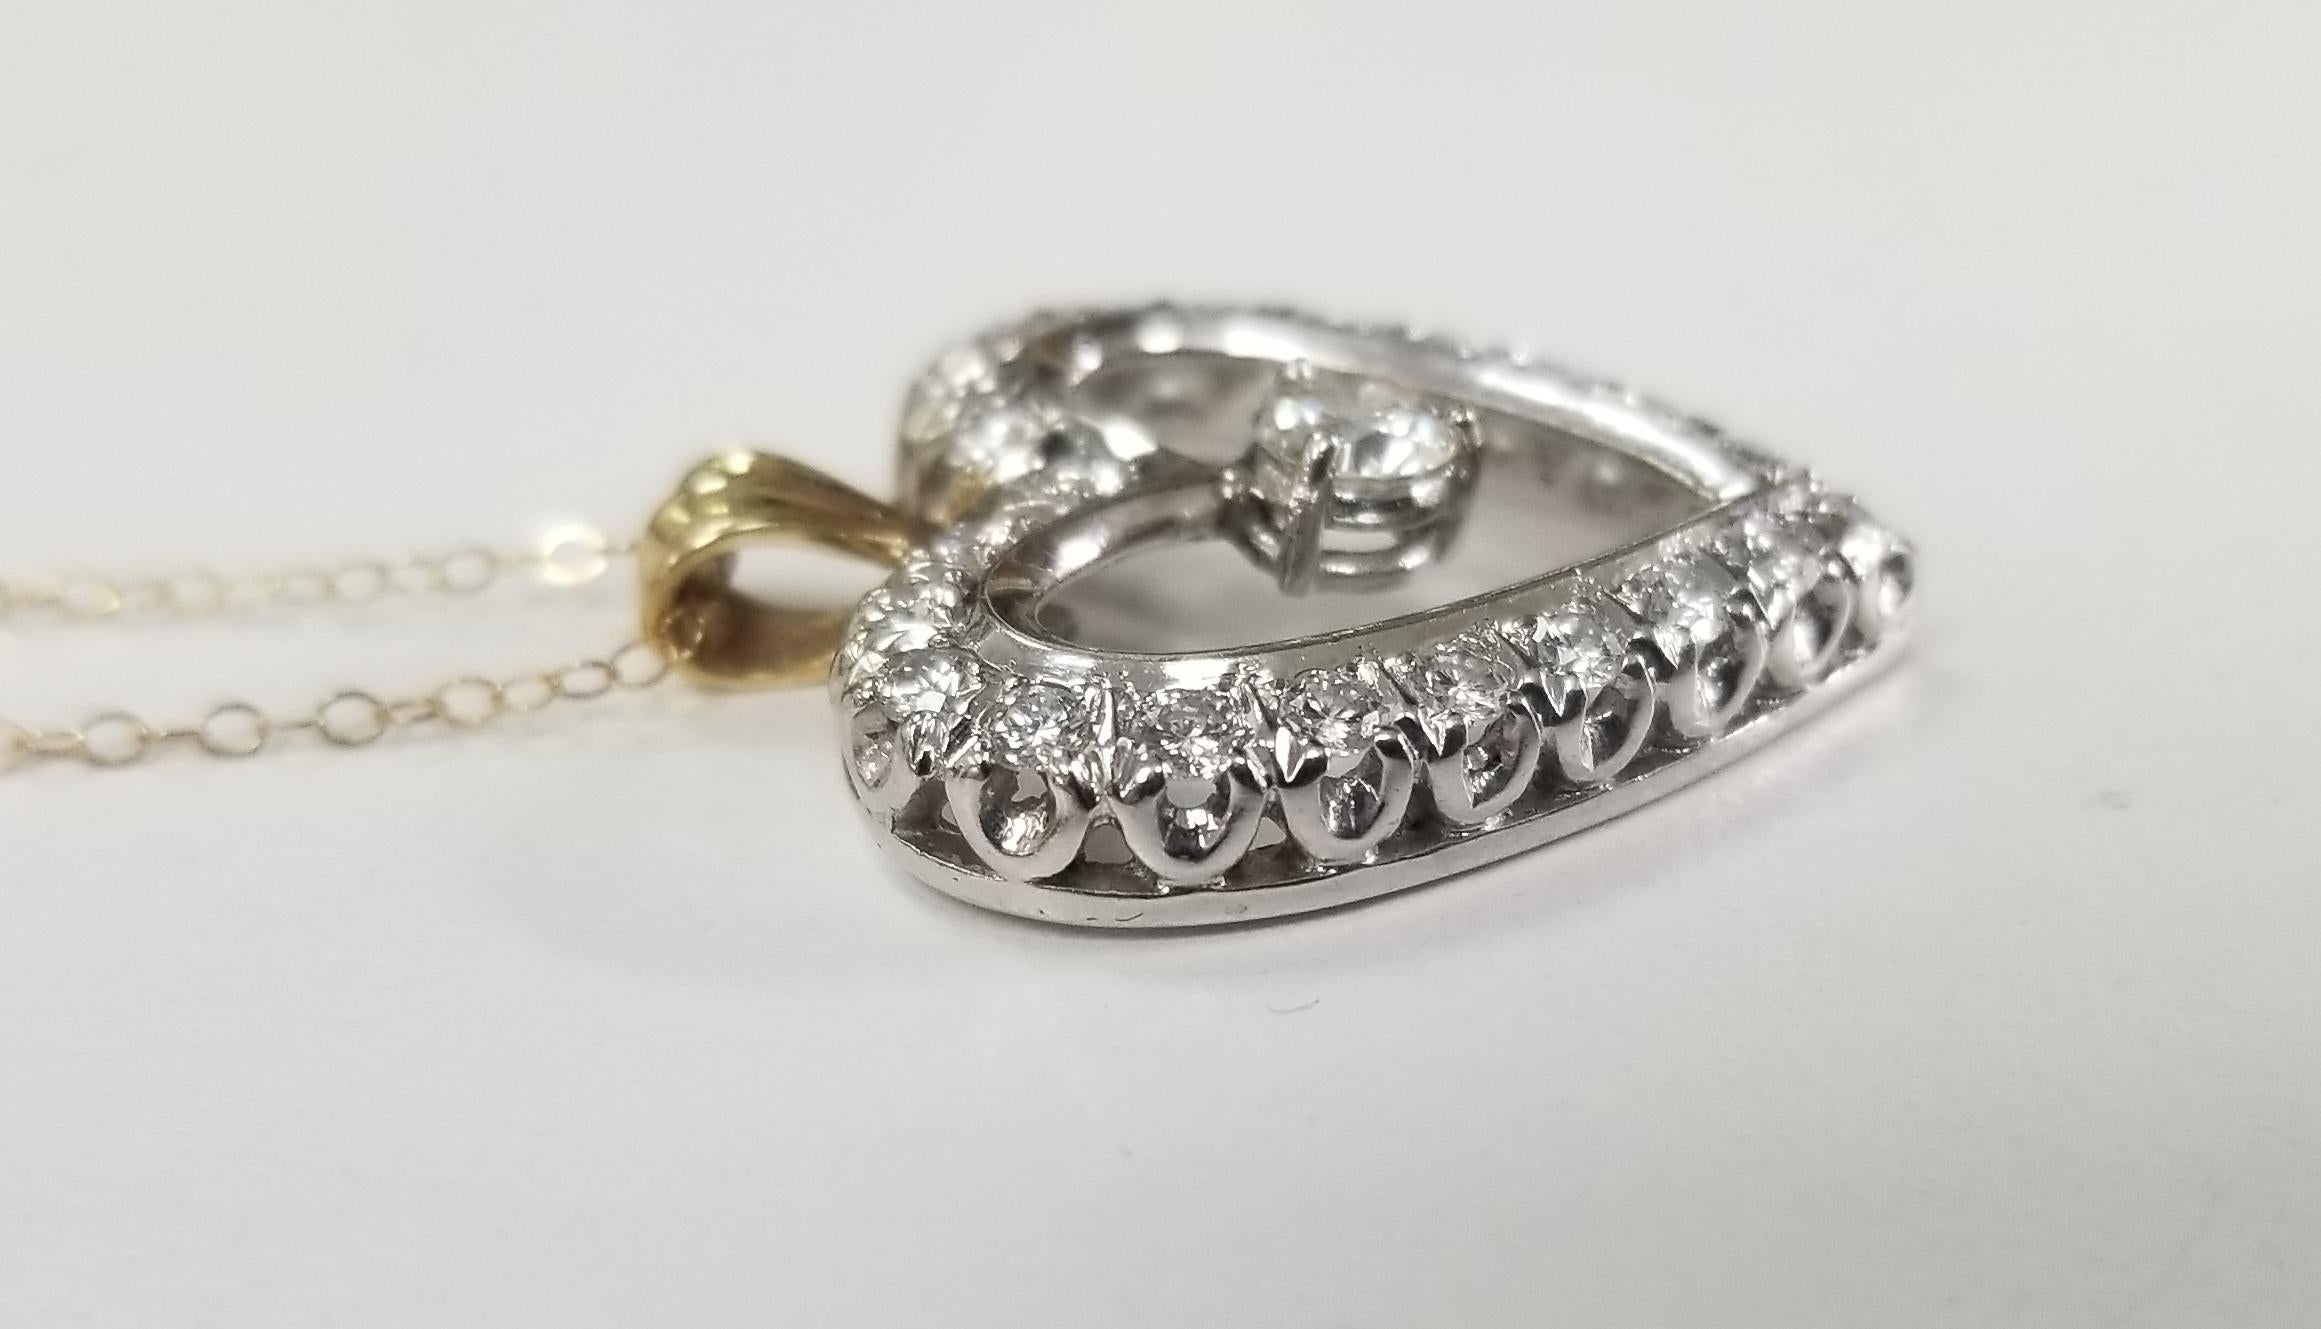 14k white gold vintage Art Deco Style diamond heart pendant, containing 23 round full cut diamonds of very fine quality weighing 1.35cts. on 16 inch 14k yellow gold chain 15 inch.